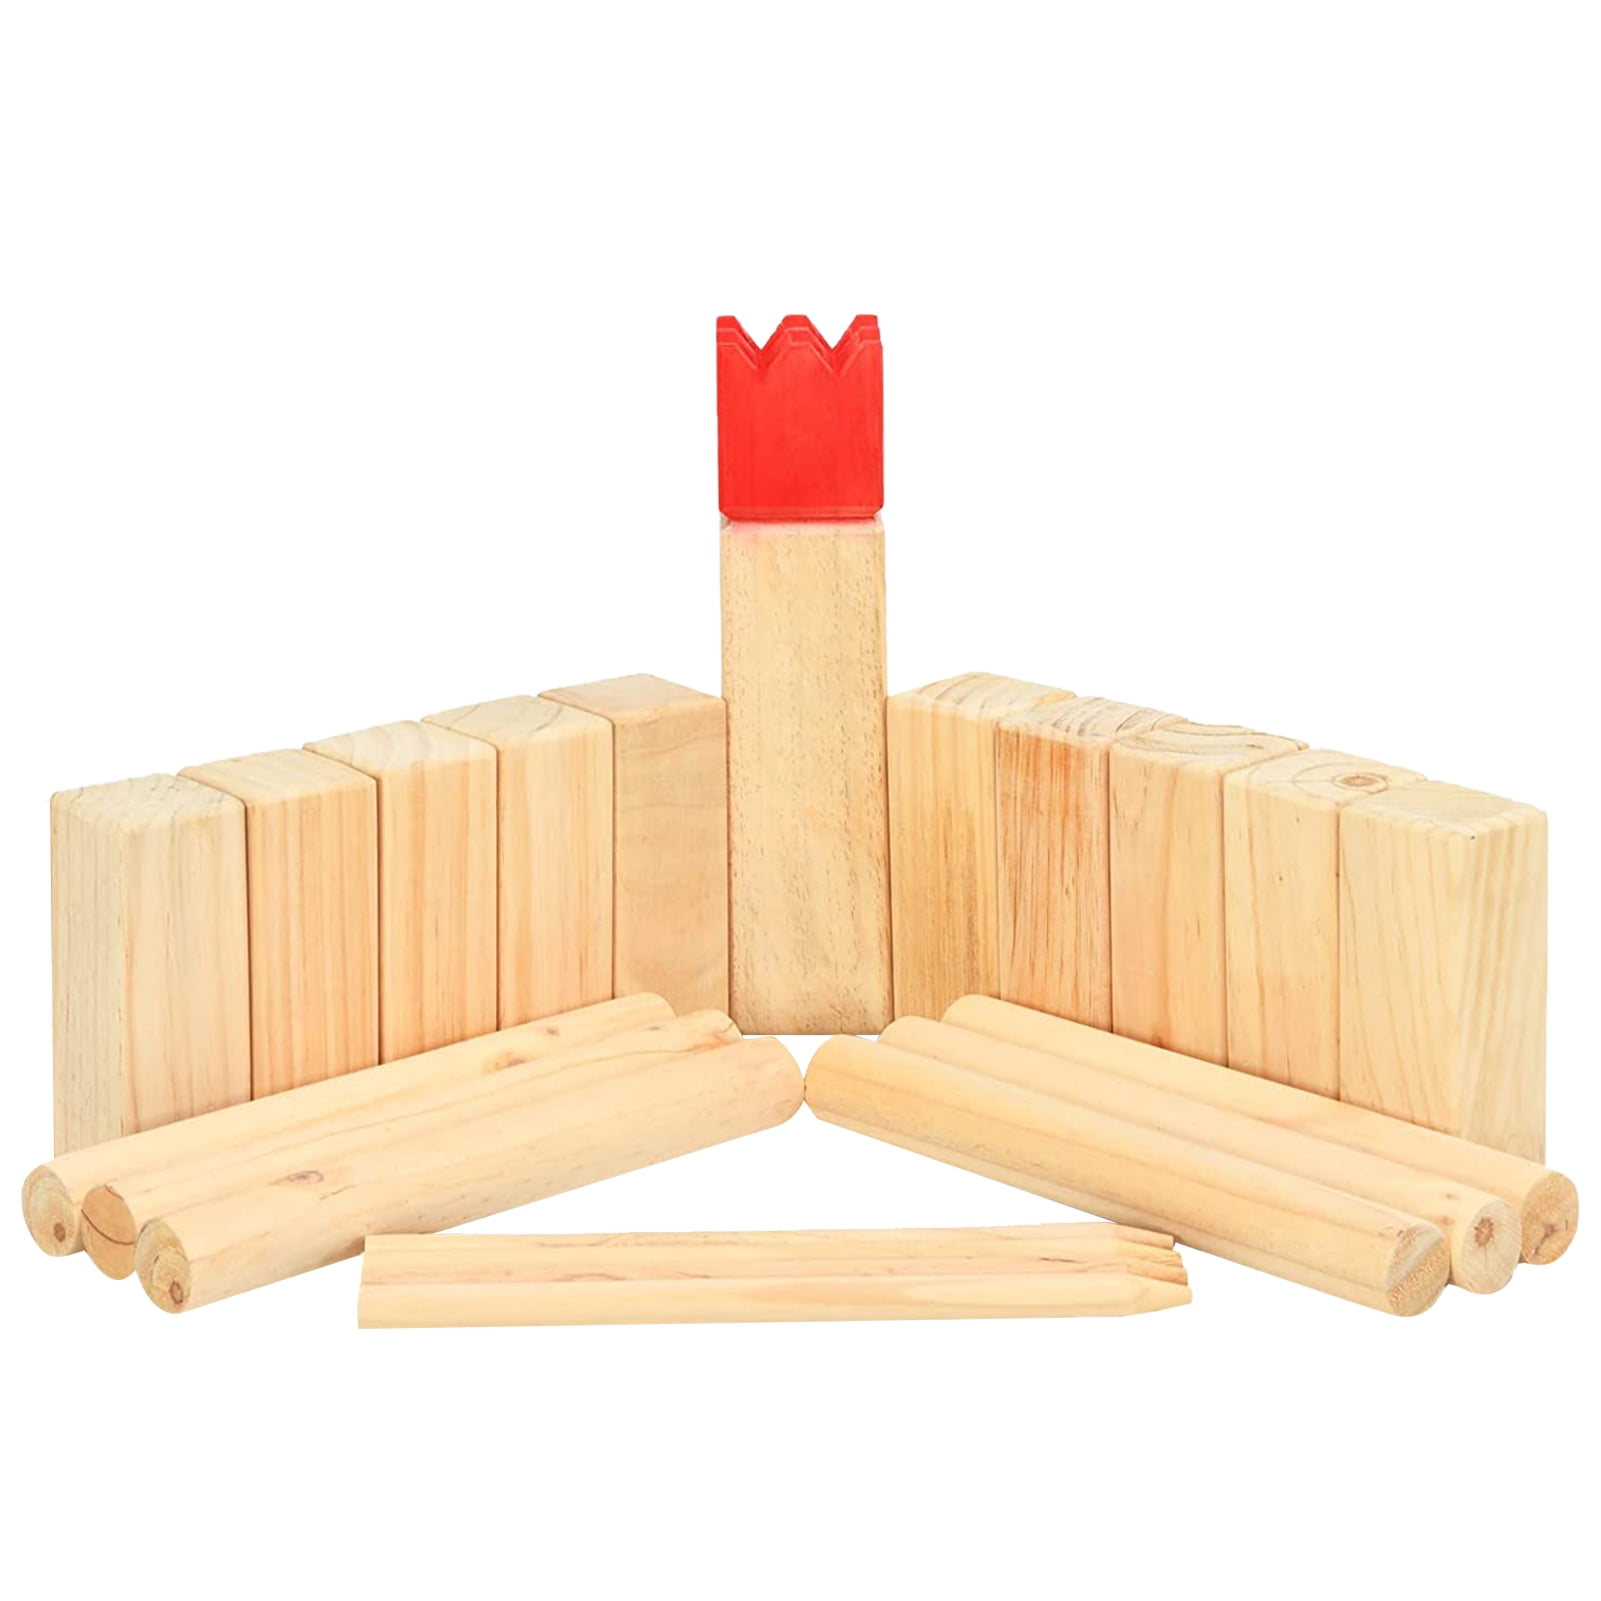 Dag Outlook Brig BESTHUA Kubb Outdoor Game | Pinewood Kubb Game Set | Viking Chess Lawn Yard  Outdoor Games For Adults and Family Toss Games, Choose Backyard Or  Regulation Size - Walmart.com